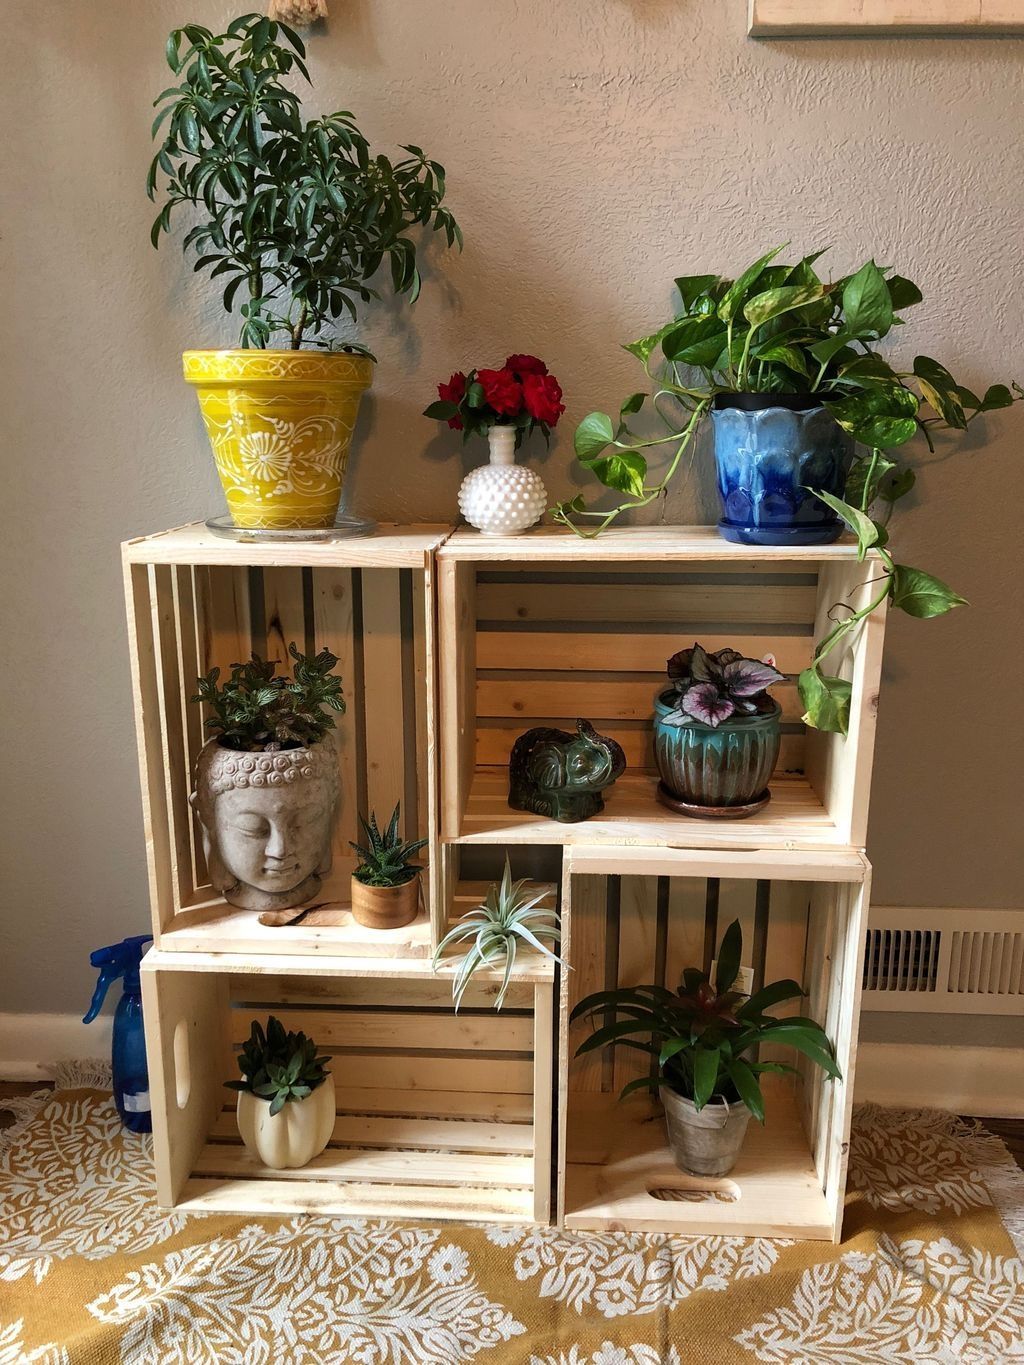 36 Unique Diy Plant Stand Ideas To Fill Your Home With Greenery -   14 plants House concept ideas